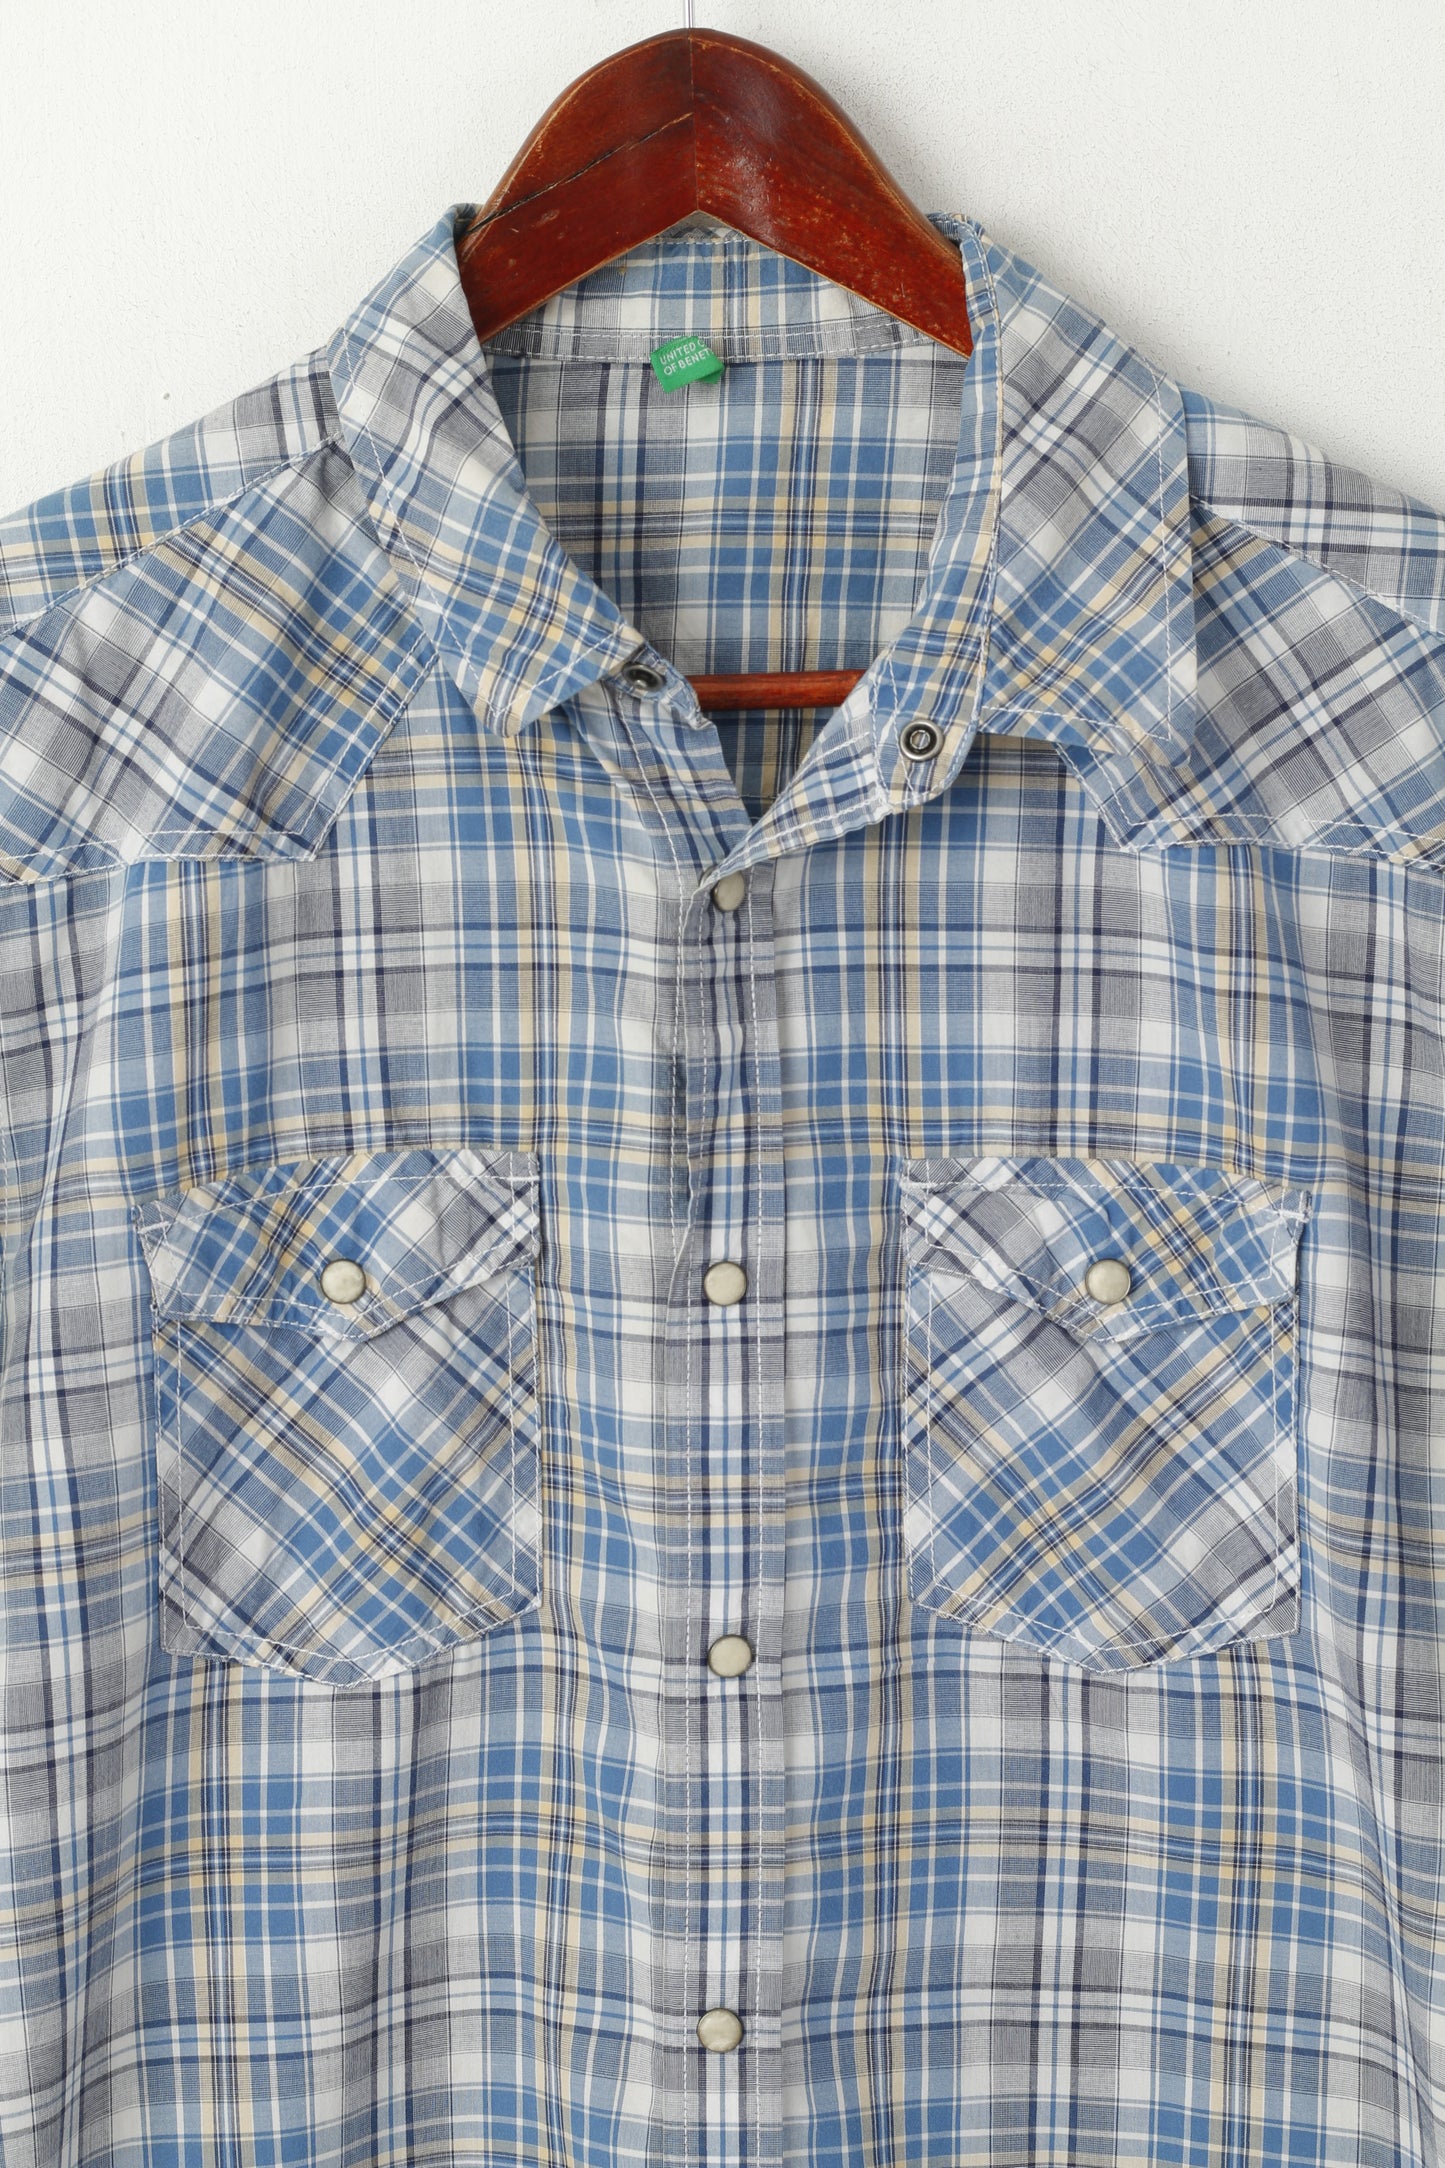 United Colors Of Benetton Men XL (L) Casual Shirt Blue Cotton Checkered Snap Pocket Top